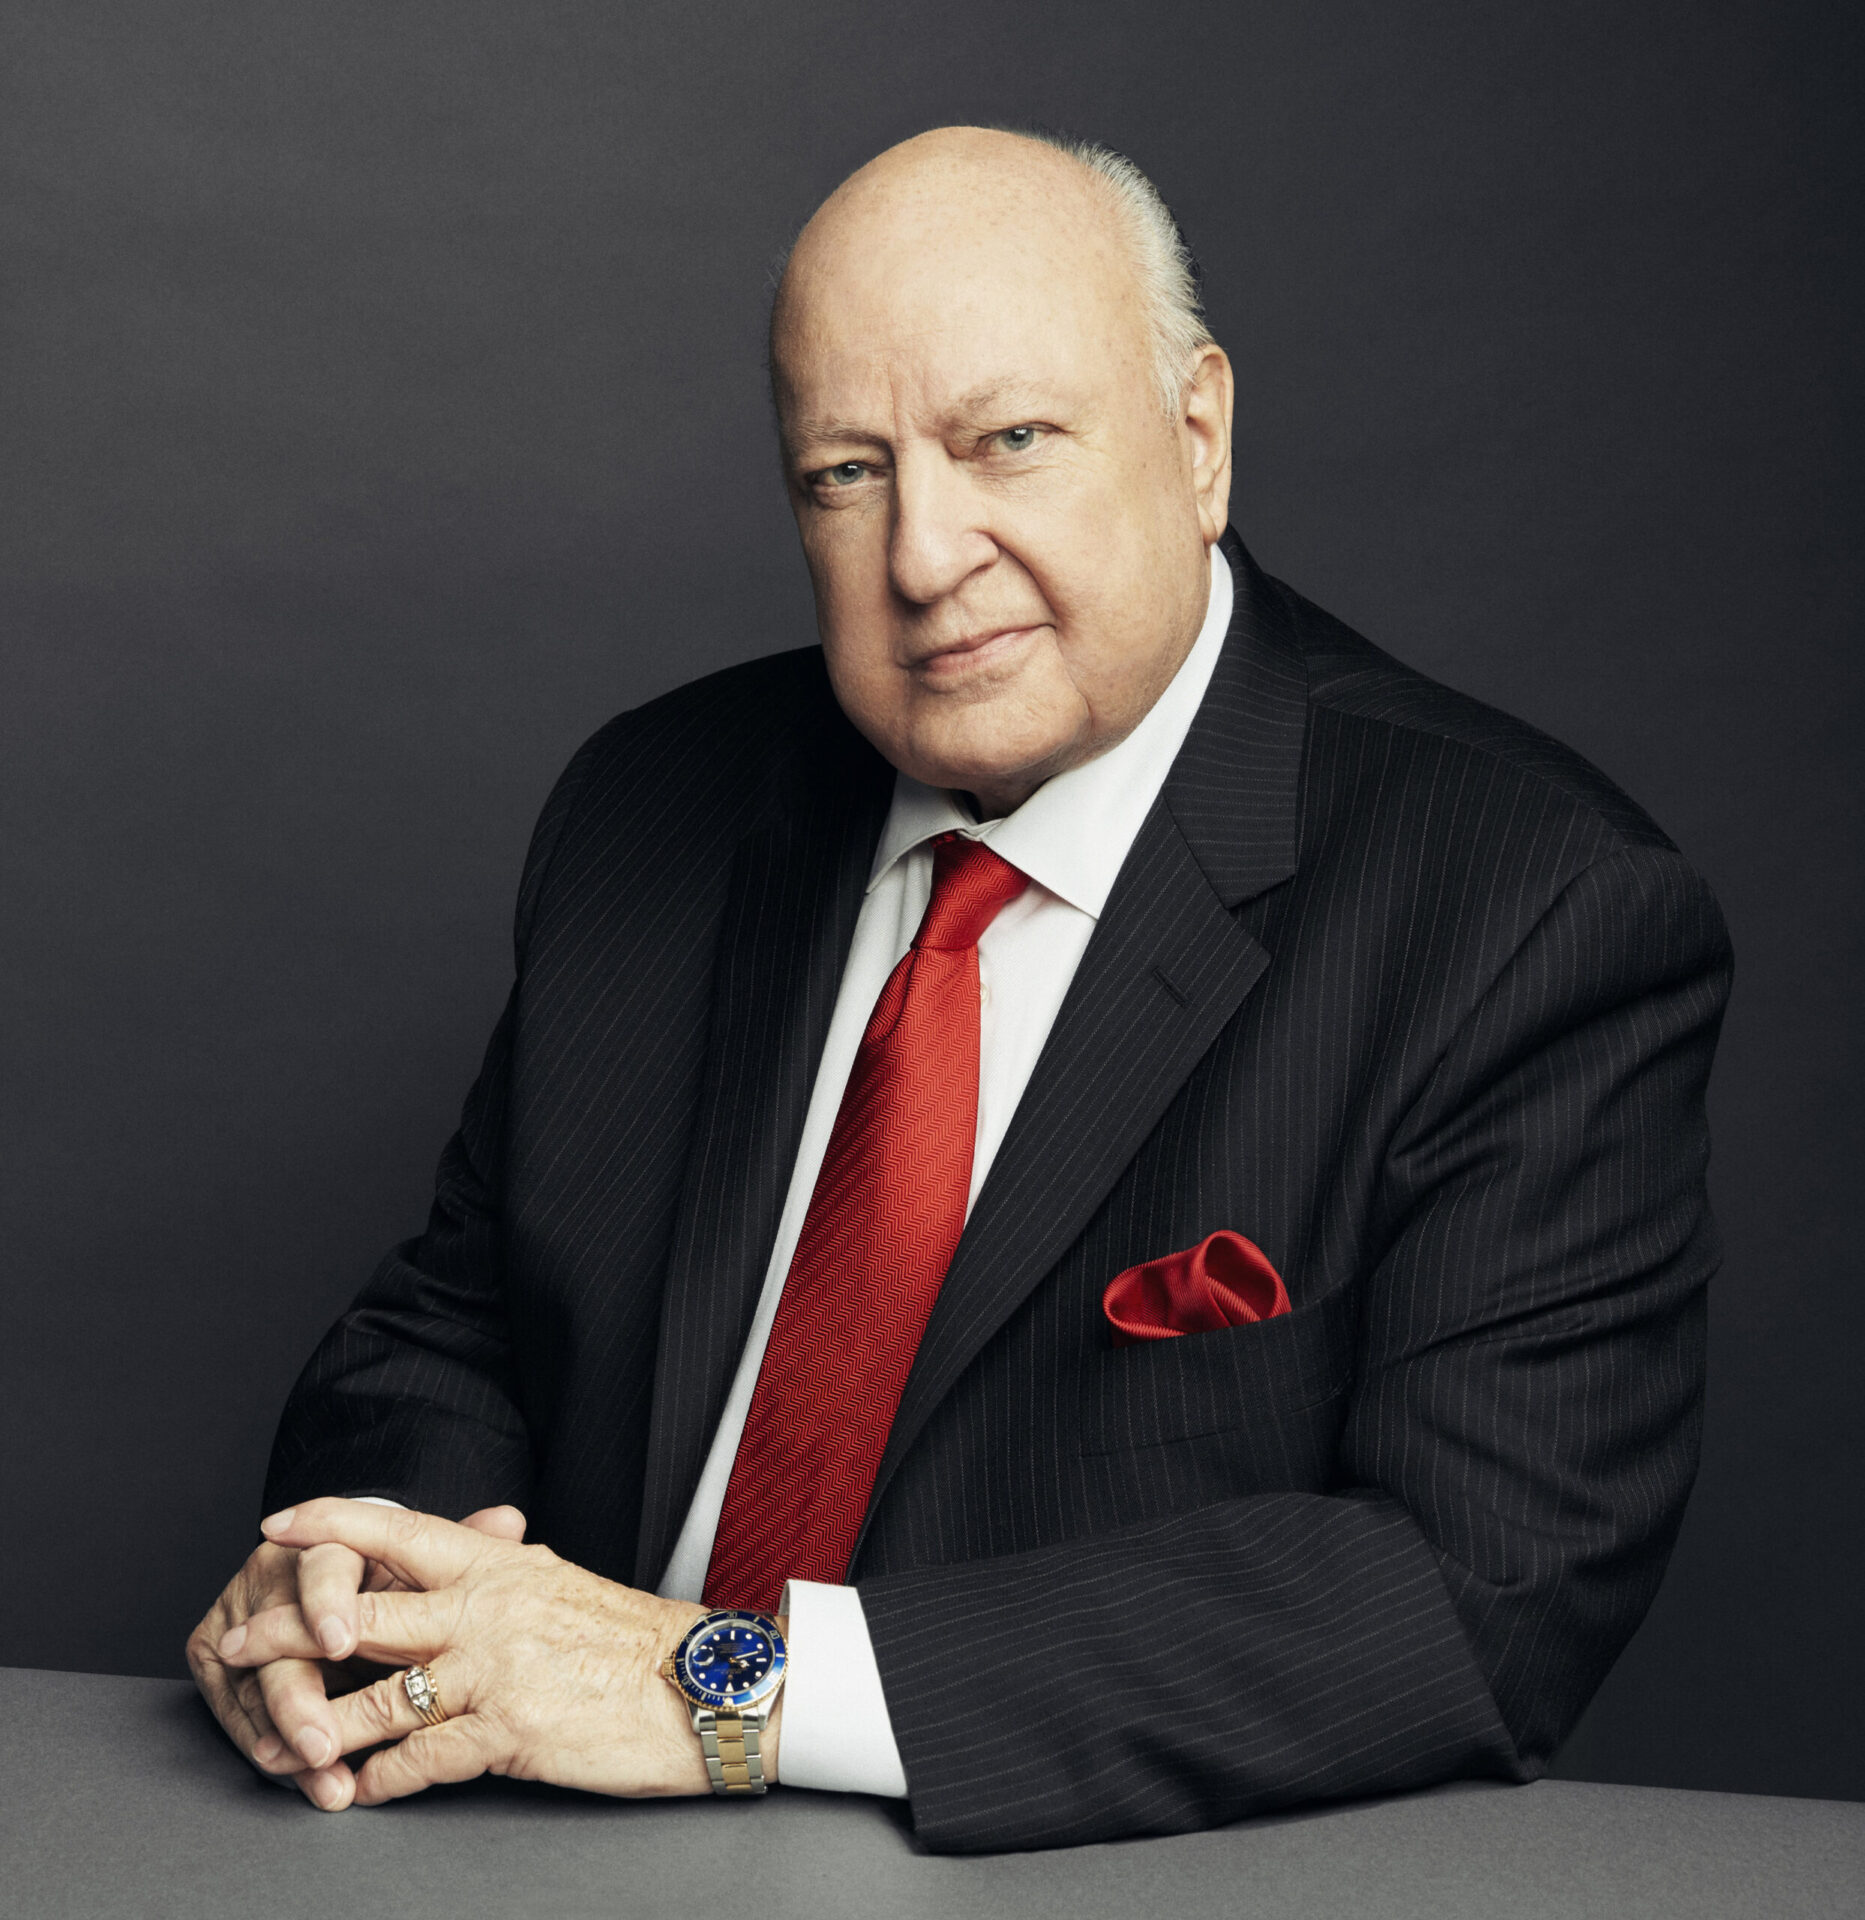 Roger Ailes Biography: Net Worth, Age, Awards, Spouse, Height, Children, Death